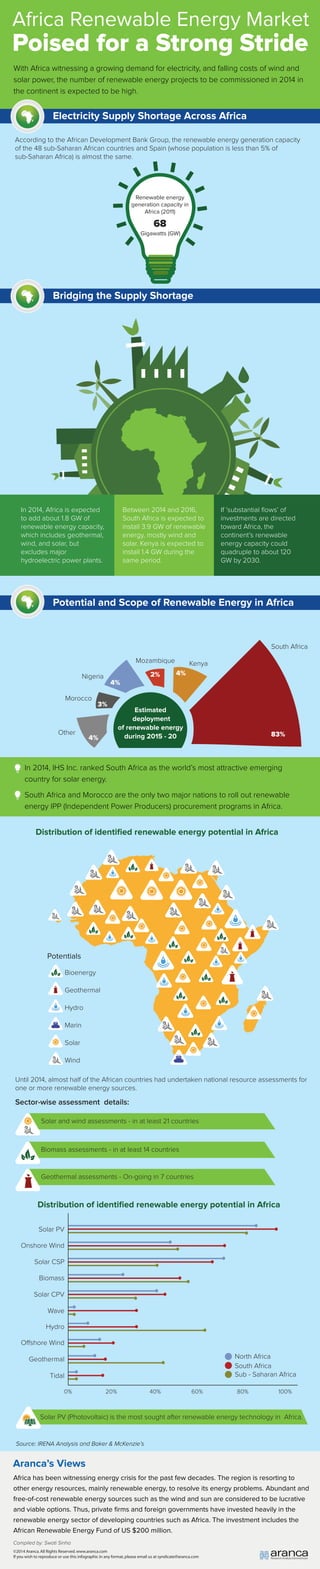 Africa Renewable Energy Market 
Poised for a Strong Stride 
With Africa witnessing a growing demand for electricity, and falling costs of wind and 
solar power, the number of renewable energy projects to be commissioned in 2014 in 
the continent is expected to be high. 
Electricity Supply Shortage Across Africa 
According to the African Development Bank Group, the renewable energy generation capacity 
of the 48 sub-Saharan African countries and Spain (whose population is less than 5% of 
sub-Saharan Africa) is almost the same. 
Renewable energy 
generation capacity in 
Africa (2011) 
68 
Gigawatts (GW) 
Bridging the Supply Shortage 
In 2014, Africa is expected 
to add about 1.8 GW of 
renewable energy capacity, 
which includes geothermal, 
wind, and solar, but 
excludes major 
hydroelectric power plants. 
Between 2014 and 2016, 
South Africa is expected to 
install 3.9 GW of renewable 
energy, mostly wind and 
solar. Kenya is expected to 
install 1.4 GW during the 
same period. 
If ‘substantial flows’ of 
investments are directed 
toward Africa, the 
continent’s renewable 
energy capacity could 
quadruple to about 120 
GW by 2030. 
Potential and Scope of Renewable Energy in Africa 
South Africa 
Mozambique Kenya 
Nigeria 
Morocco 
Other 
Estimated 
deployment 
4% 
of renewable energy 
during 2015 - 20 83% 
4% 
2% 
4% 
3% 
In 2014, IHS Inc. ranked South Africa as the world’s most attractive emerging 
country for solar energy. 
South Africa and Morocco are the only two major nations to roll out renewable 
energy IPP (Independent Power Producers) procurement programs in Africa. 
Distribution of identified renewable energy potential in Africa 
Potentials 
Bioenergy 
Geothermal 
Hydro 
Marin 
Solar 
Wind 
Until 2014, almost half of the African countries had undertaken national resource assessments for 
one or more renewable energy sources. 
Sector-wise assessment details: 
Solar and wind assessments - in at least 21 countries 
Biomass assessments - in at least 14 countries 
Geothermal assessments - On-going in 7 countries 
Distribution of identified renewable energy potential in Africa 
Solar PV 
Onshore Wind 
Solar CSP 
Biomass 
Solar CPV 
Wave 
Hydro 
Oshore Wind 
Geothermal 
Tidal 
0% 20% 40% 60% 80% 100% 
Source: IRENA Analysis and Baker  McKenzie’s 
Aranca’s Views 
Africa has been witnessing energy crisis for the past few decades. The region is resorting to 
other energy resources, mainly renewable energy, to resolve its energy problems. Abundant and 
free-of-cost renewable energy sources such as the wind and sun are considered to be lucrative 
and viable options. Thus, private firms and foreign governments have invested heavily in the 
renewable energy sector of developing countries such as Africa. The investment includes the 
African Renewable Energy Fund of US $200 million. 
Compiled by: Swati Sinha 
©2014 Aranca. All Rights Reserved. www.aranca.com 
If you wish to reproduce or use this infographic in any format, please email us at syndicate@aranca.com 
North Africa 
South Africa 
Sub - Saharan Africa 
Solar PV (Photovoltaic) is the most sought after renewable energy technology in Africa. 
